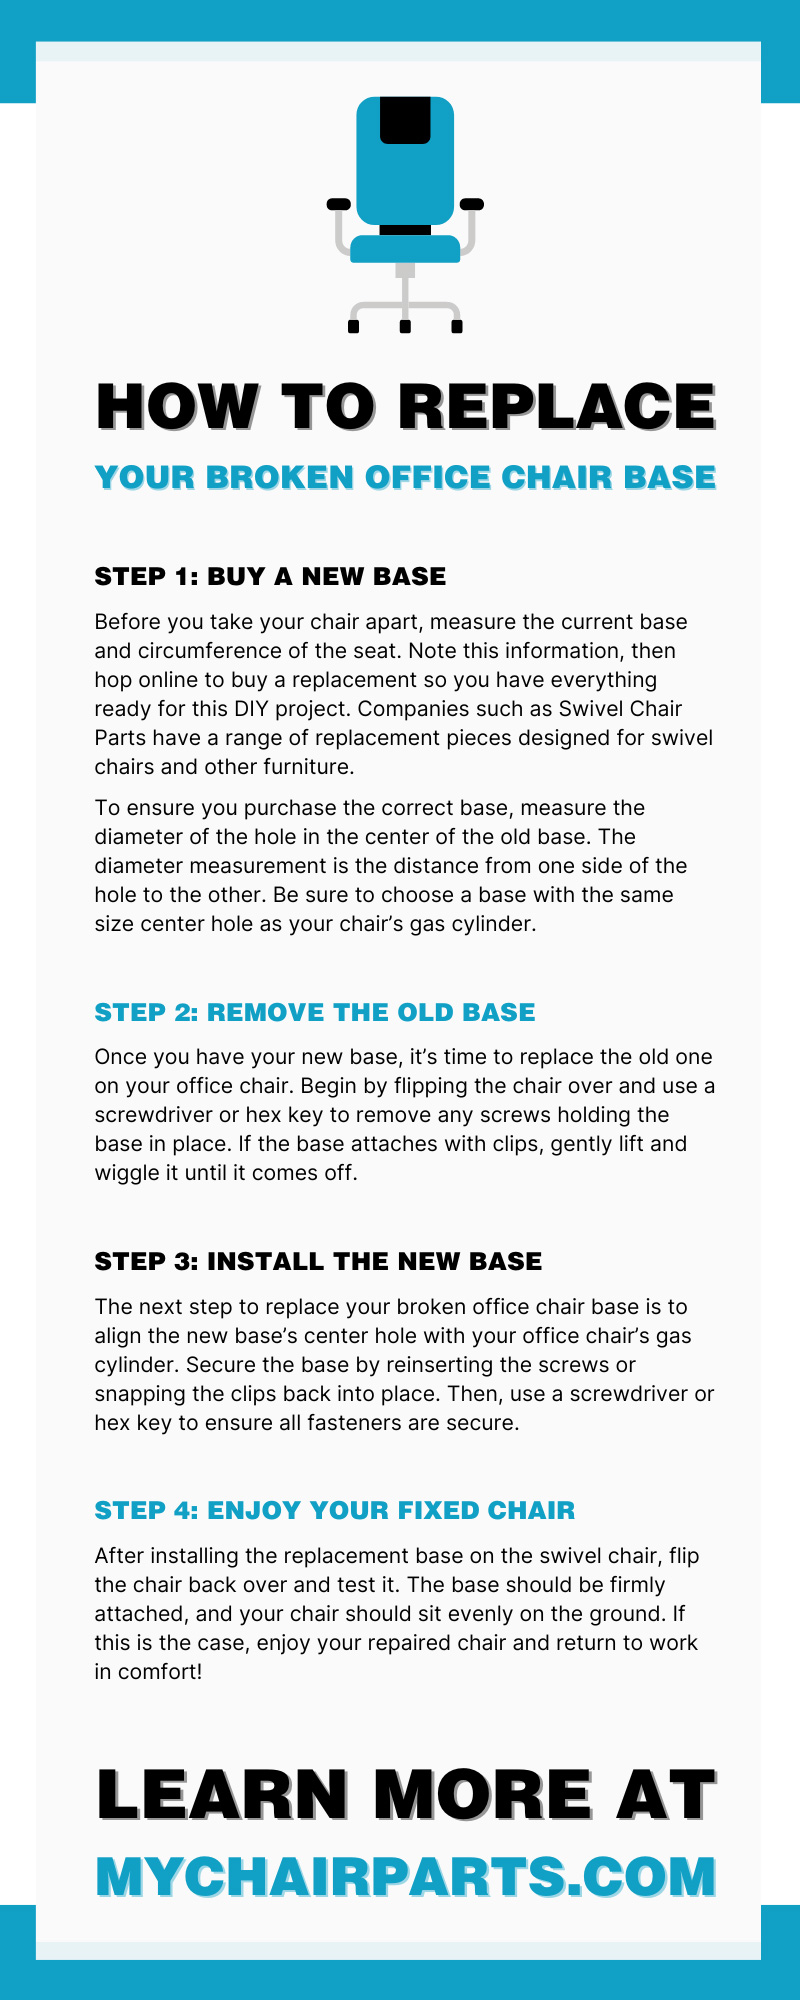 How To Replace Your Broken Office Chair Base
